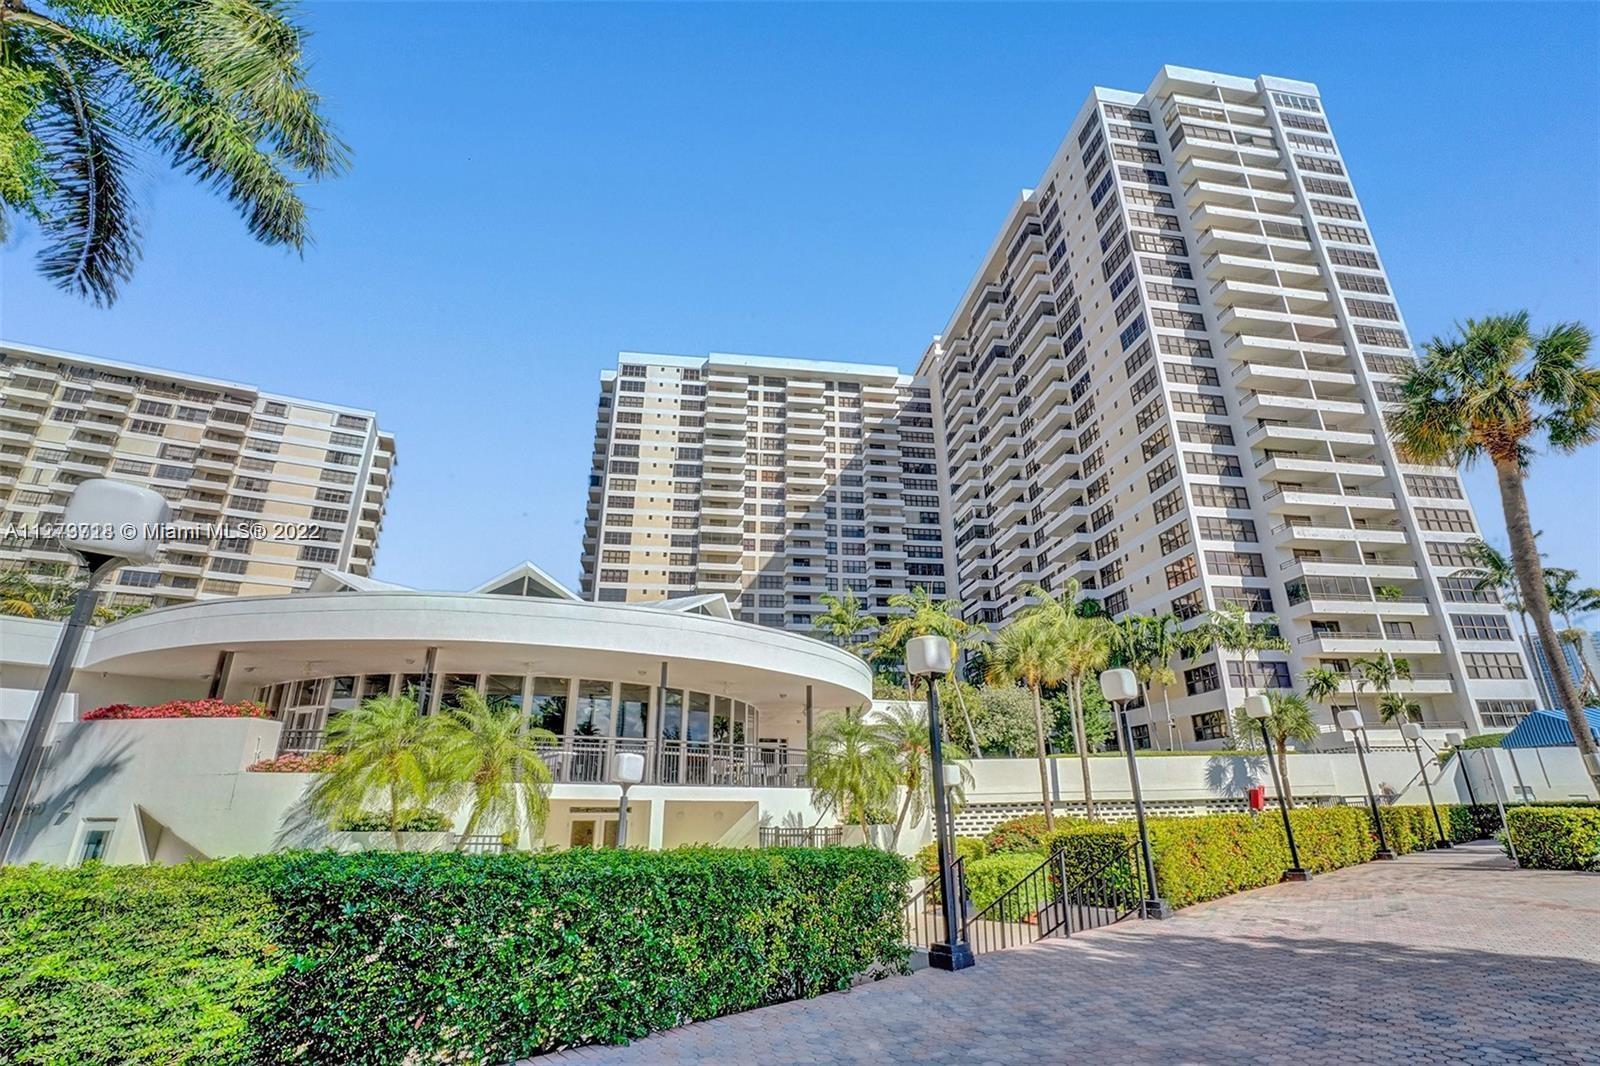 Imagine living in this Highly Exclusive Corner Unit. 1950 sq ft.  This spectacular private corner unit offers breathtaking intercoastal views and is located in the heart of East Hallandale. Situated on a High Floor with a Private Oversized Balcony Terrace .. 2500 Parkview. Hurry wont last. Rarely available. Waterfront high-rise condominium located on three islands in Hallandale Beach Florida.  updated w/ granite countertops newer appliances tile floorings, amenities include resort style pool, exercise room, sauna, valet parking, and tennis courts. Call now because you deserve the best of the best.